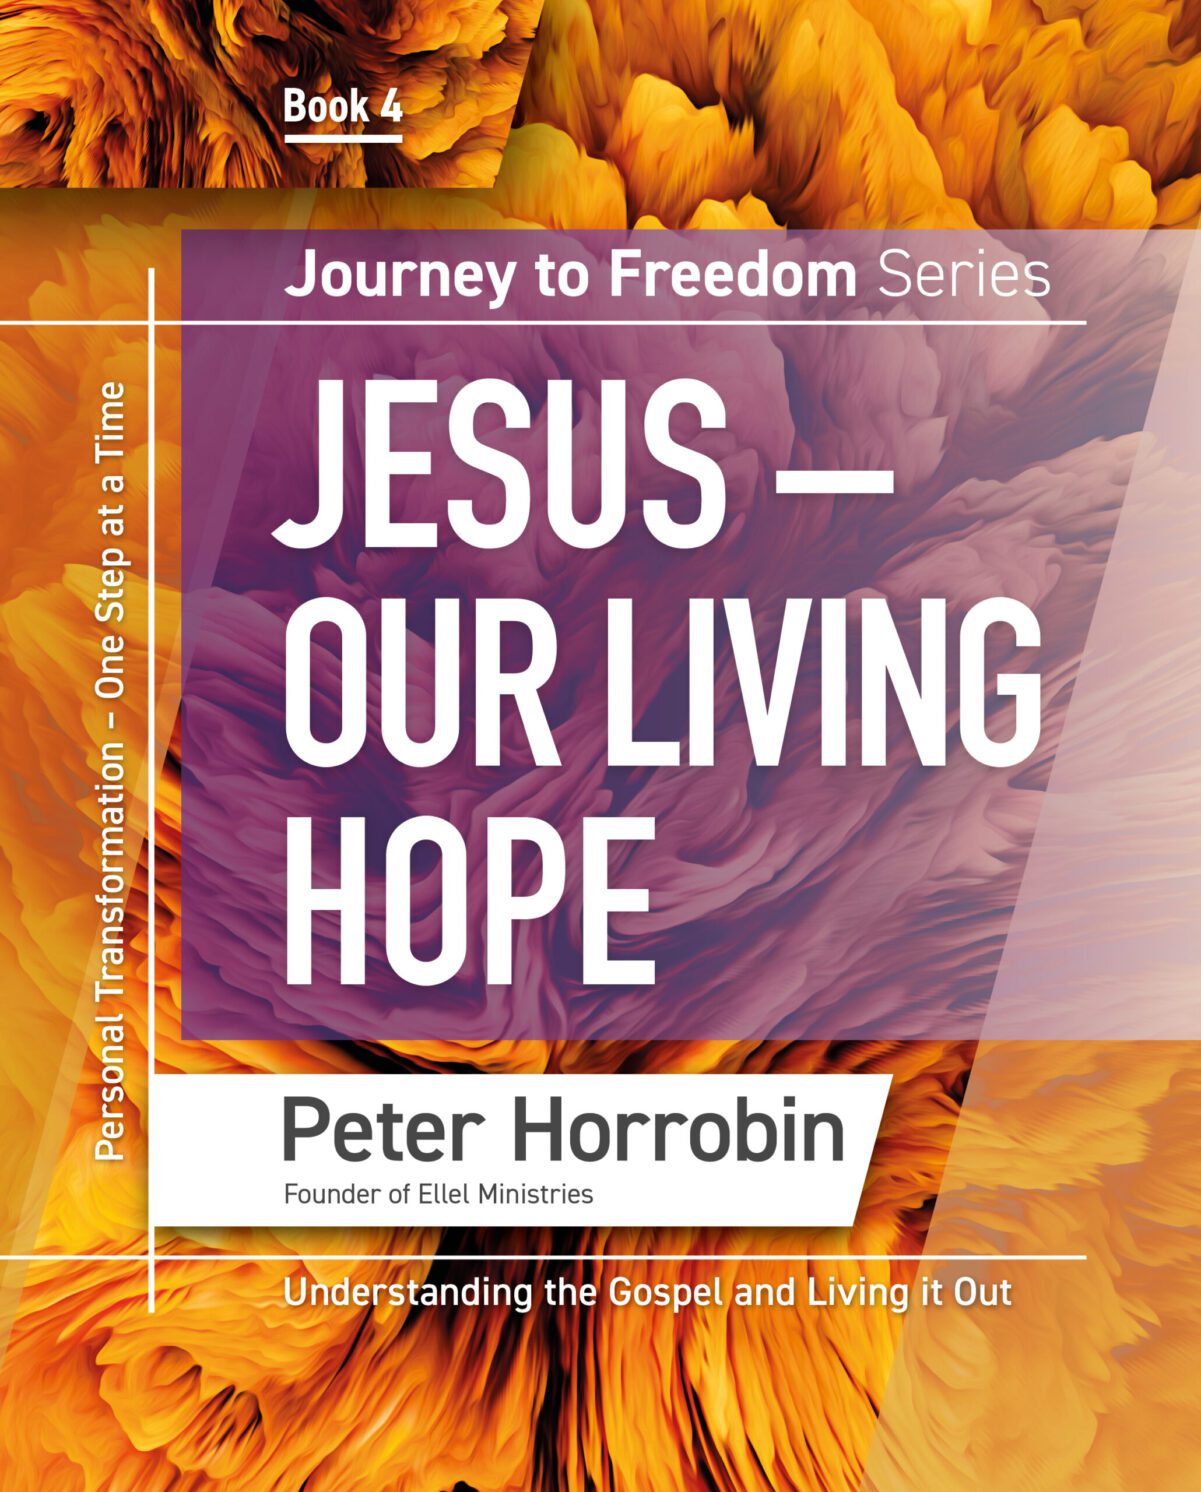 Journey to Freedom Book 4 – Jesus, Our Living Hope